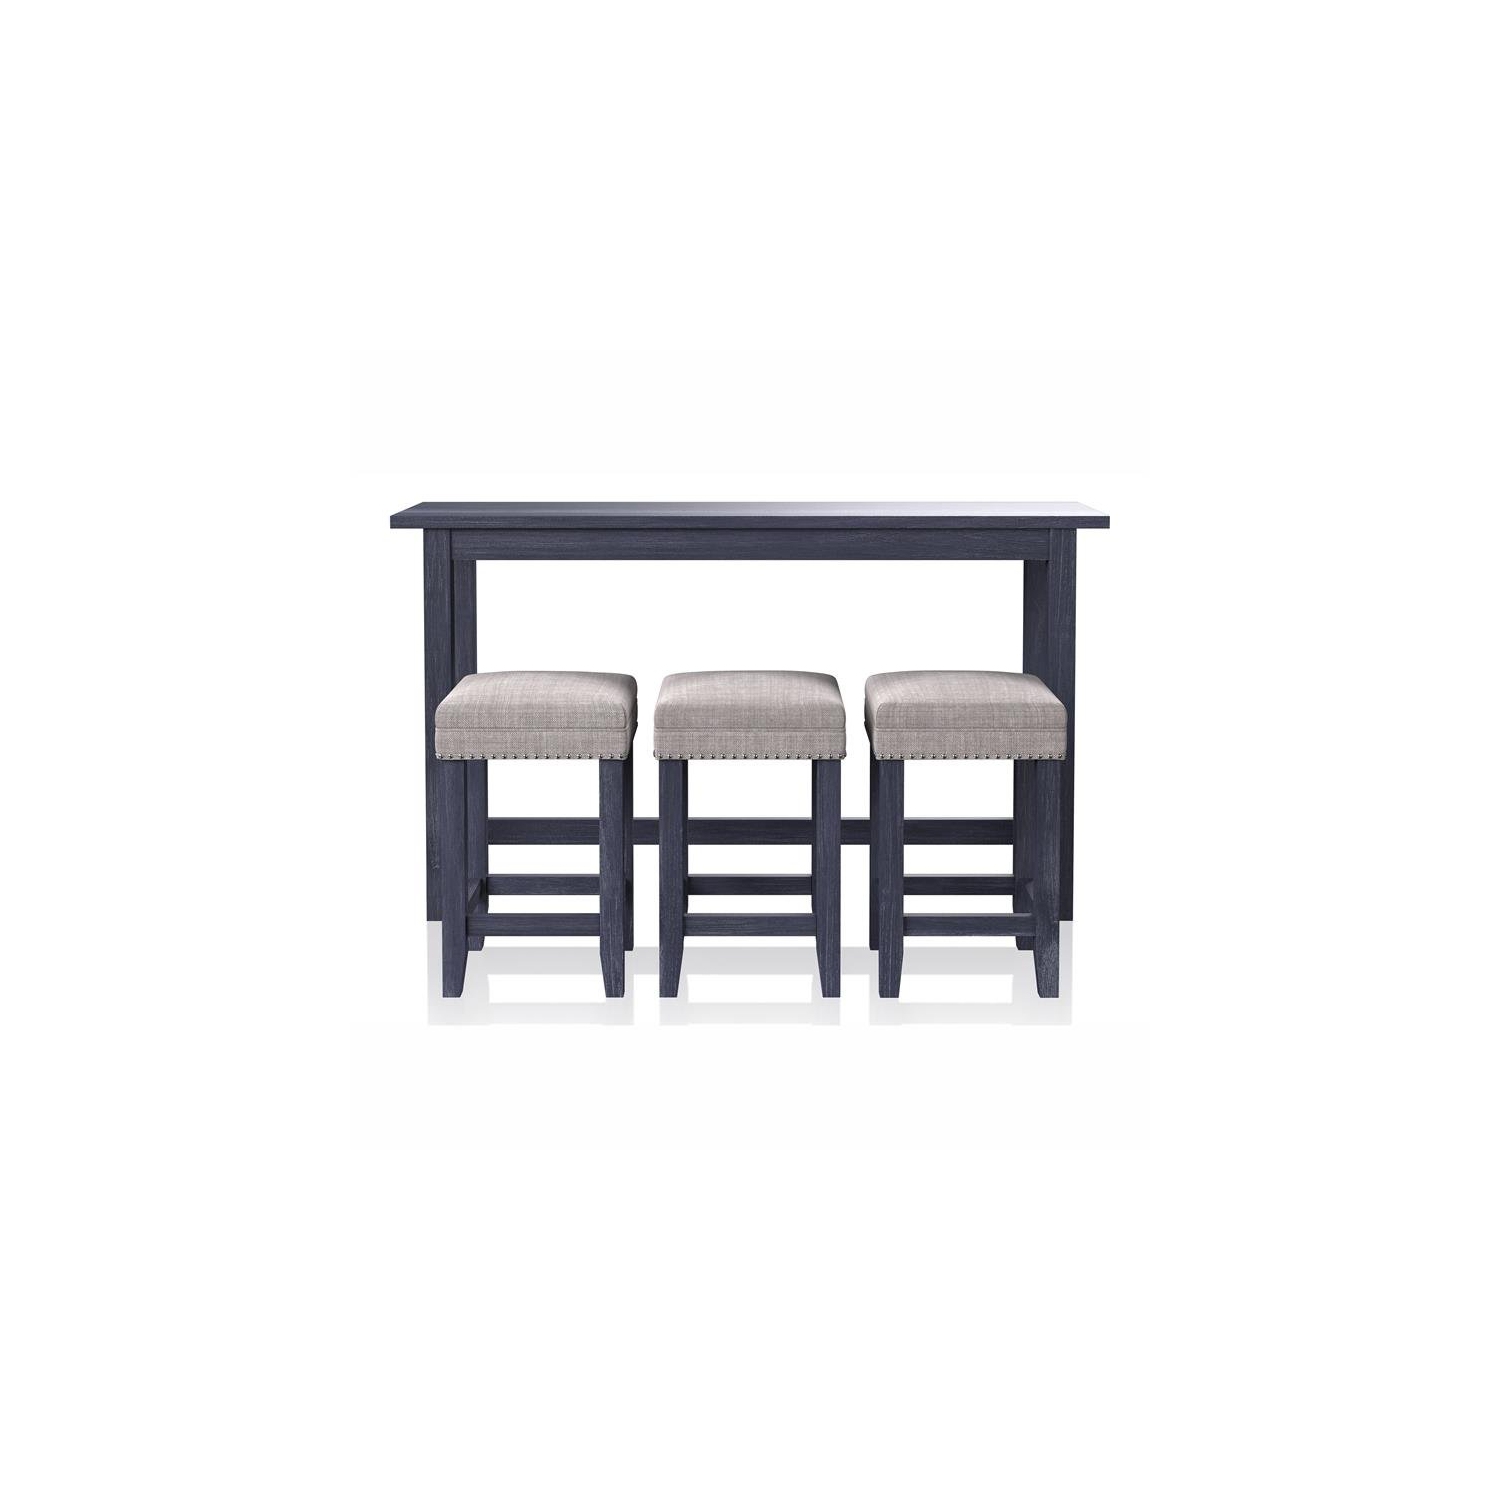 Furniture of America Sabana Wood 4-Piece Counter Height Dining Set in Blue